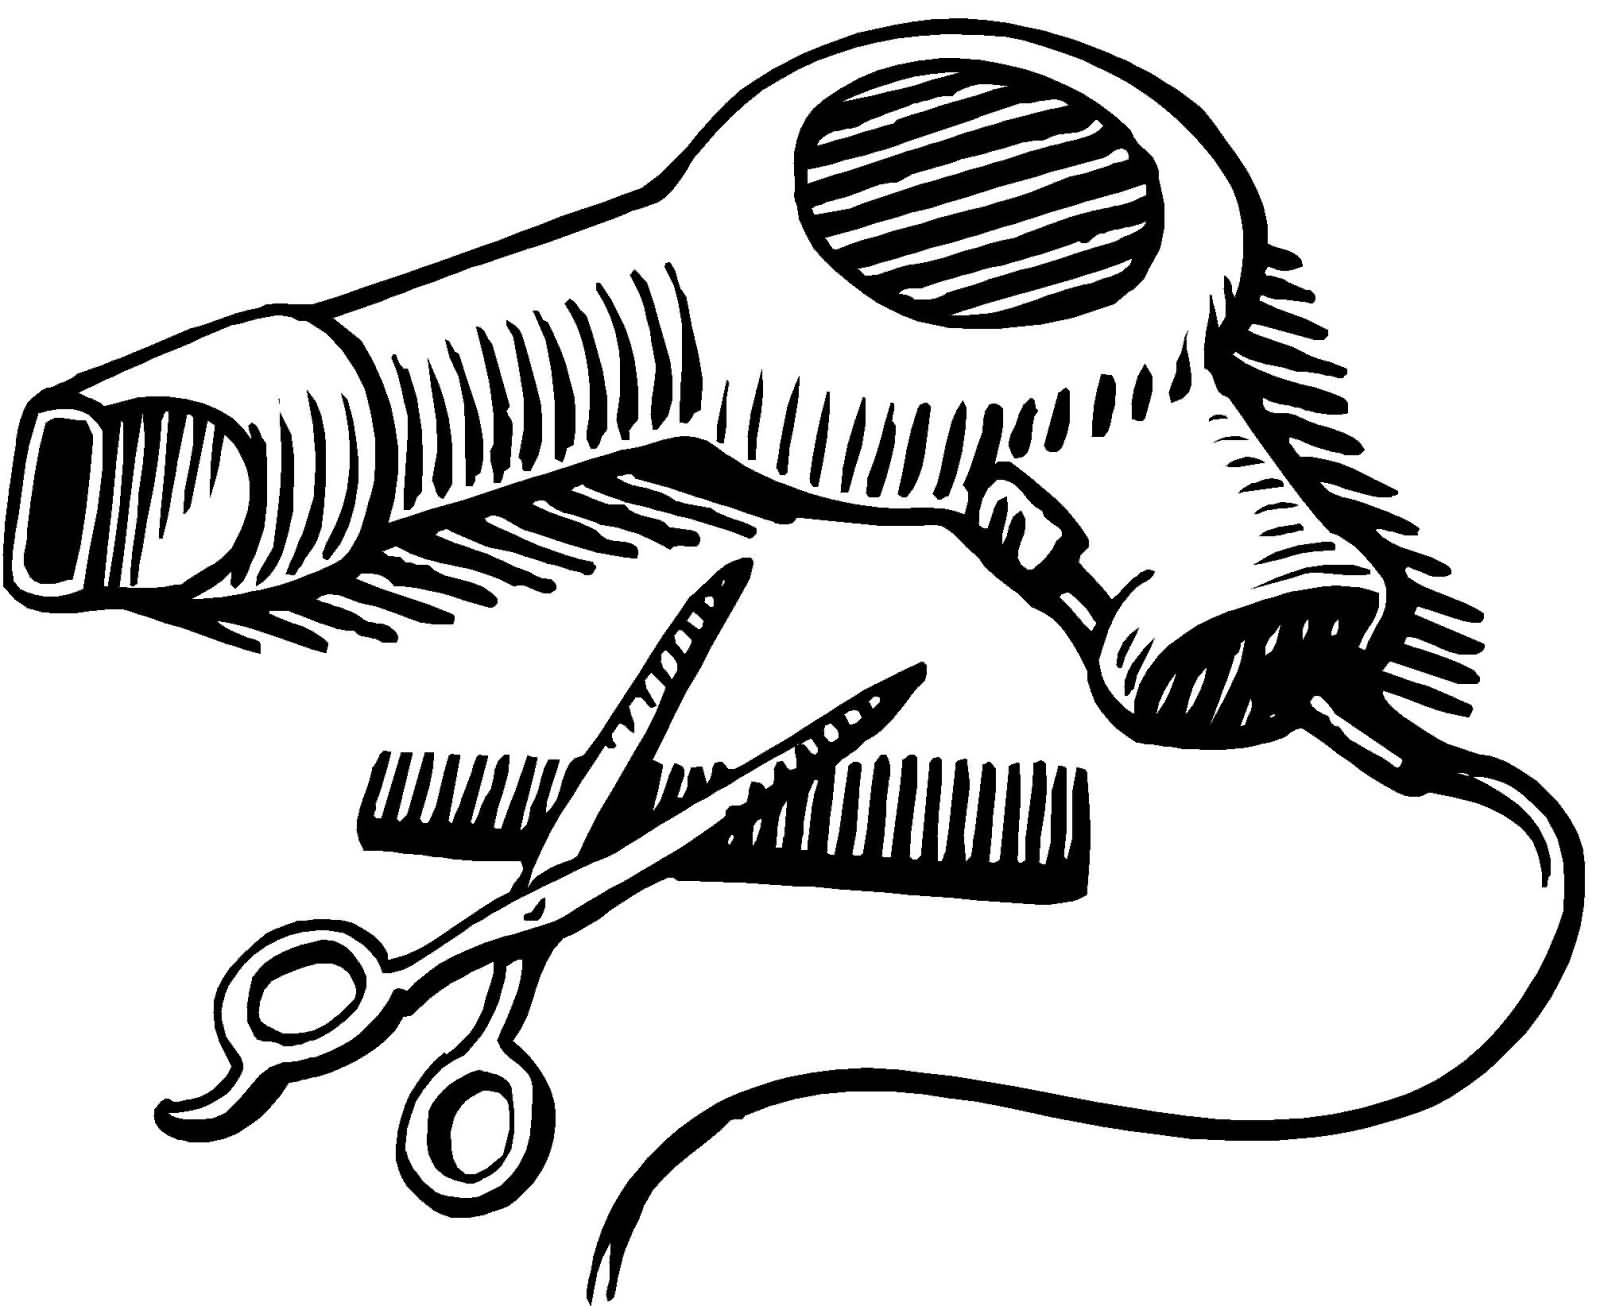 Blow dryer and scissors clipart 